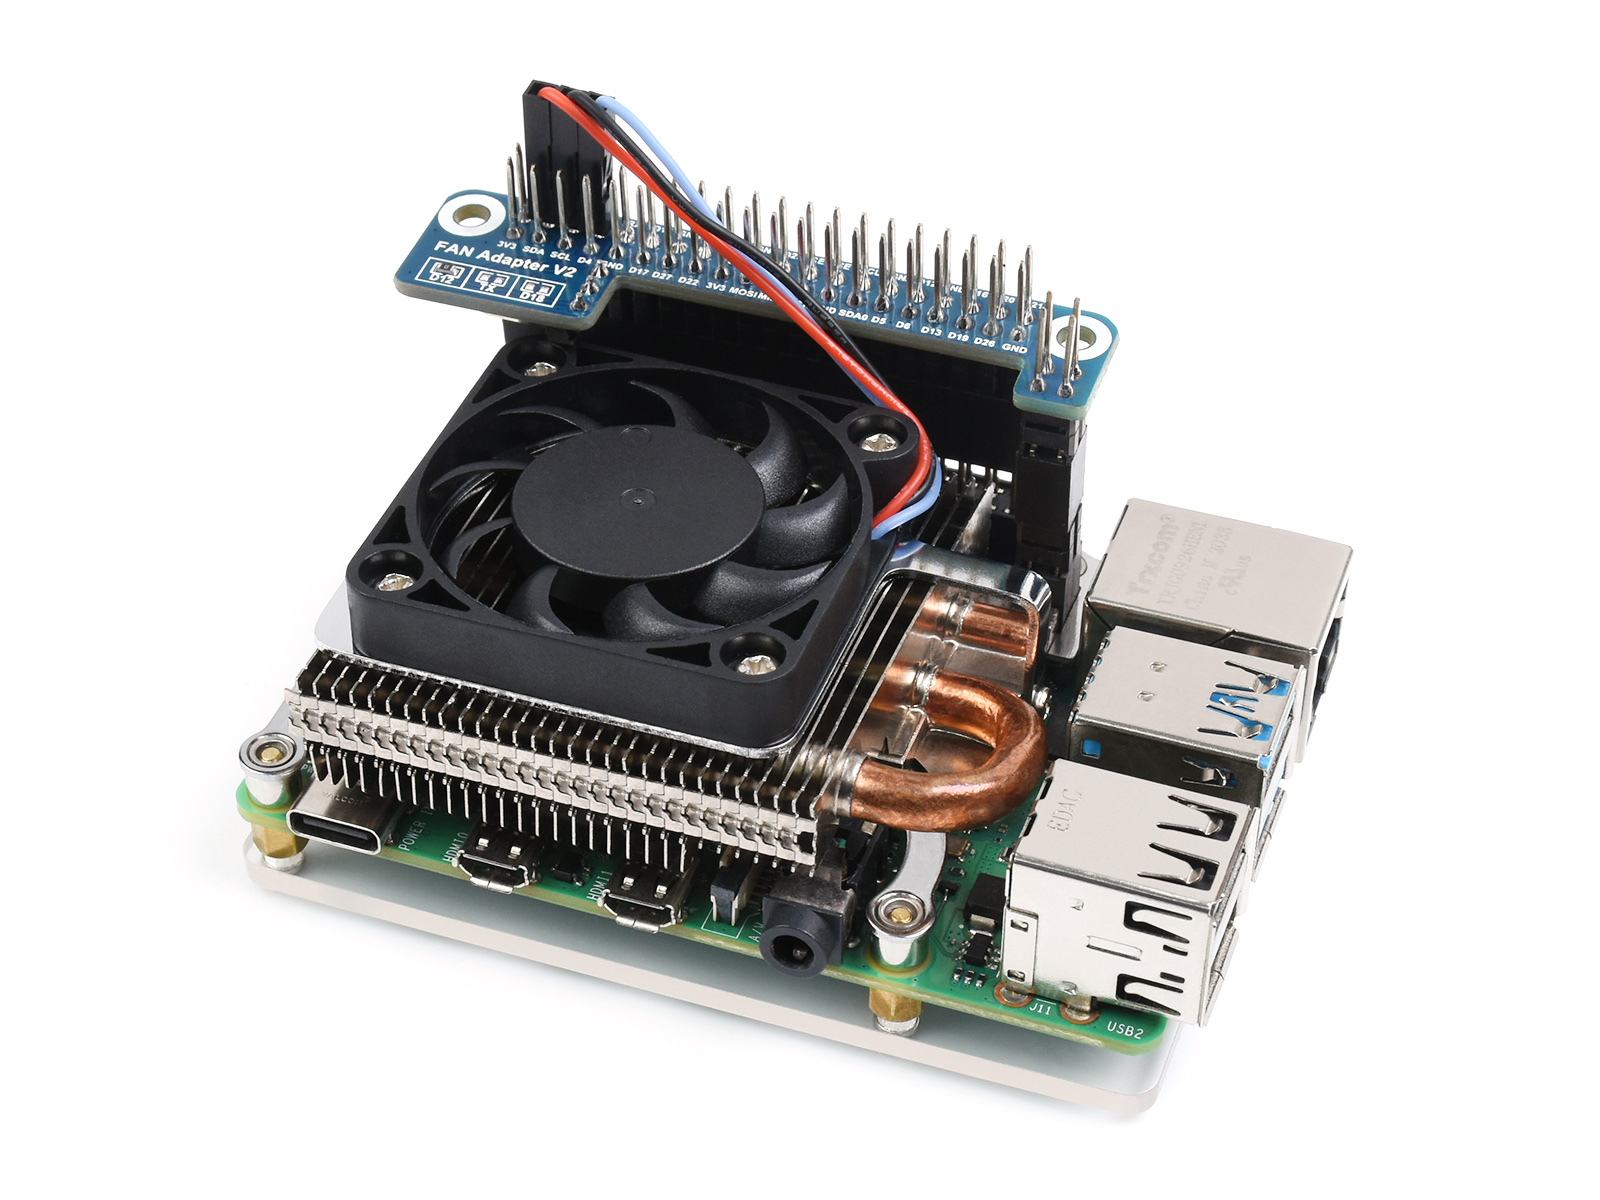 Ultra Thin ICE Tower Cooling Fan - for Raspberry Pi 4B